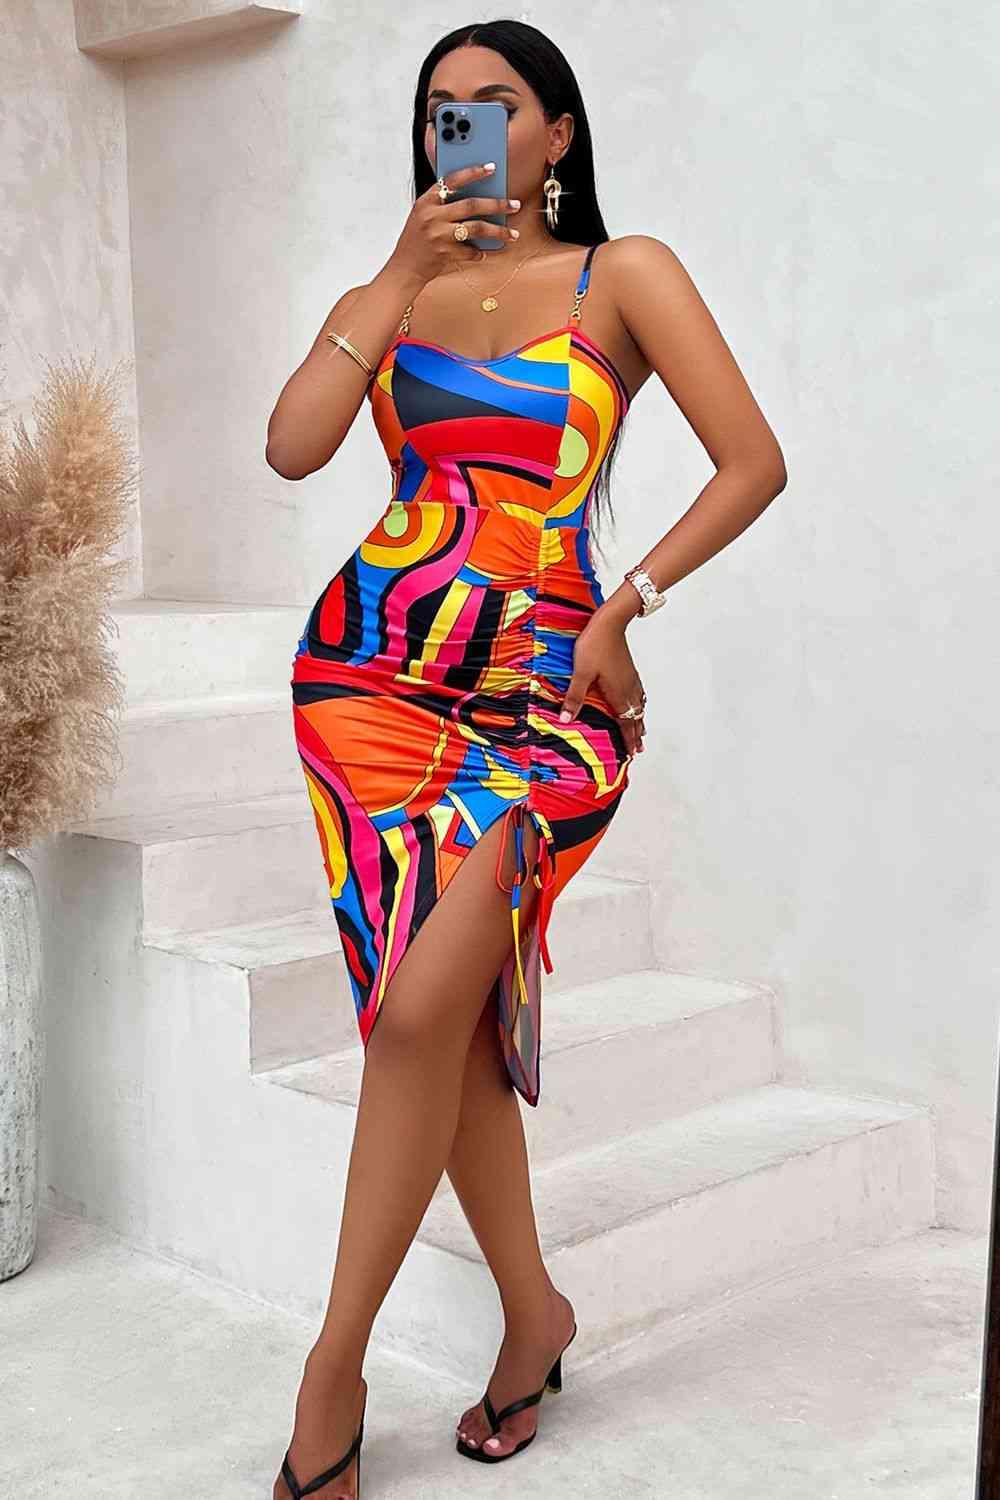 a woman taking a picture of herself in a colorful dress